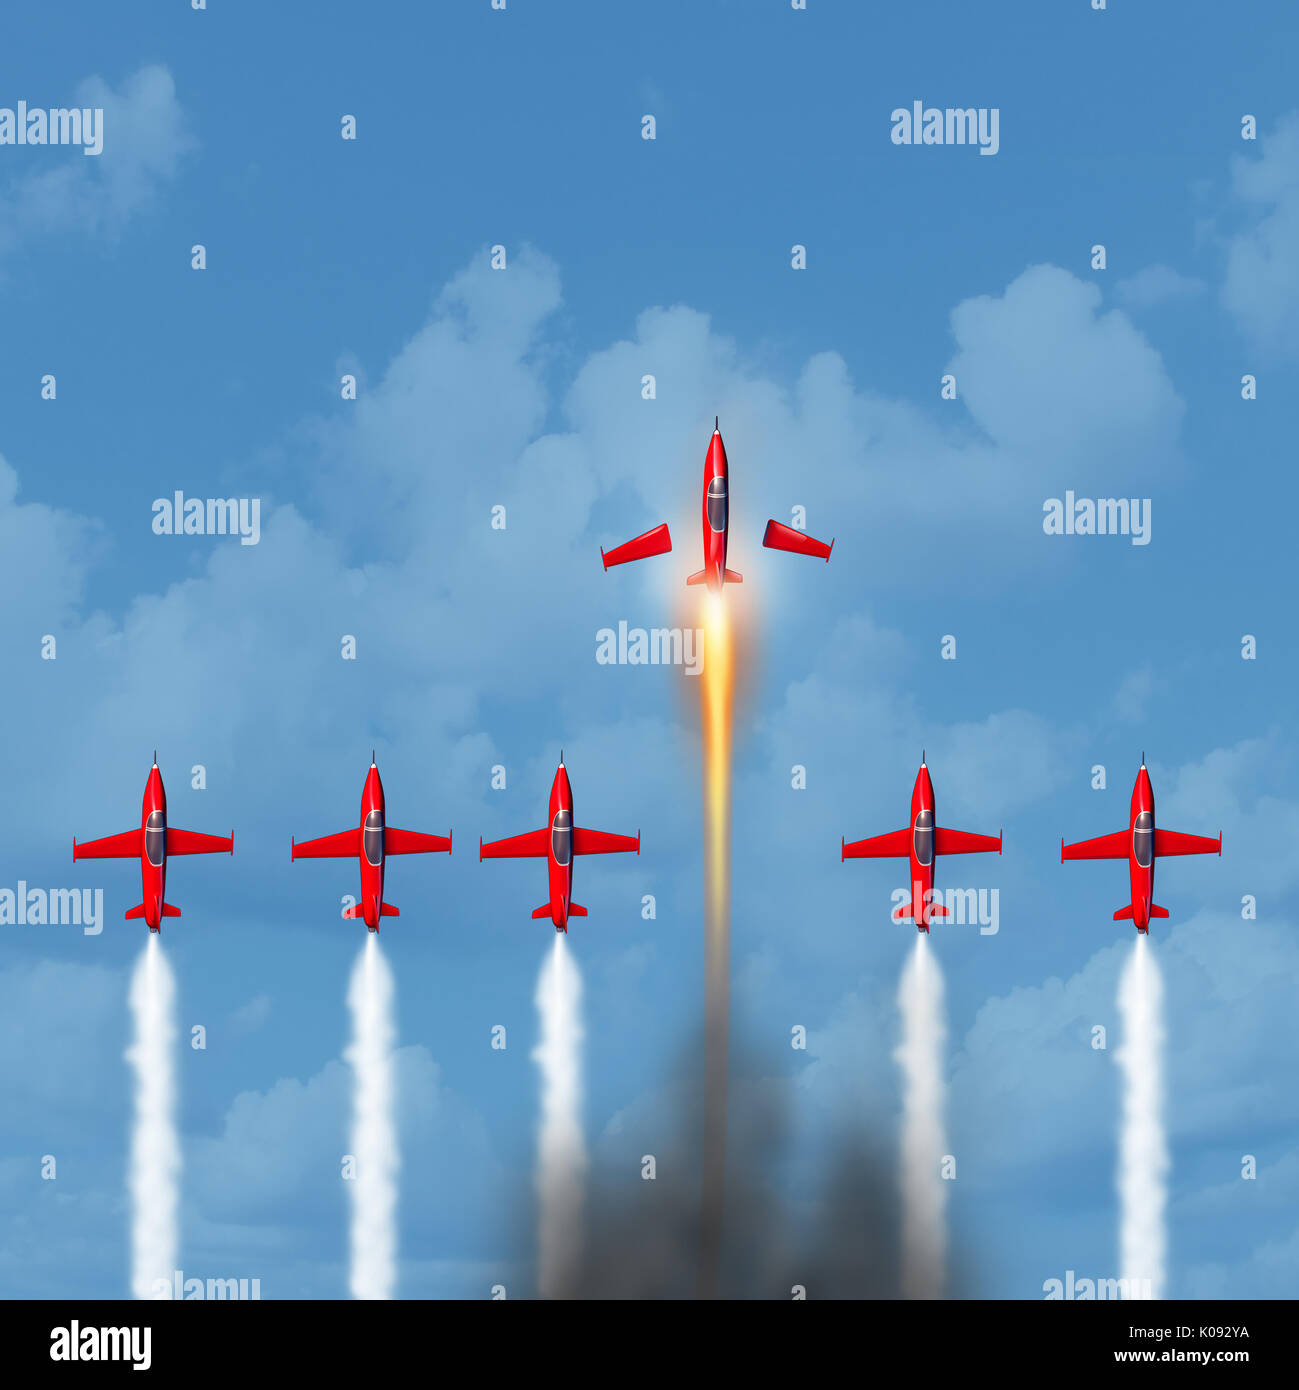 Business winner concept as a group of airplanes with air smoke trail with an individual plane transforming into a rocket blasting ahead. Stock Photo